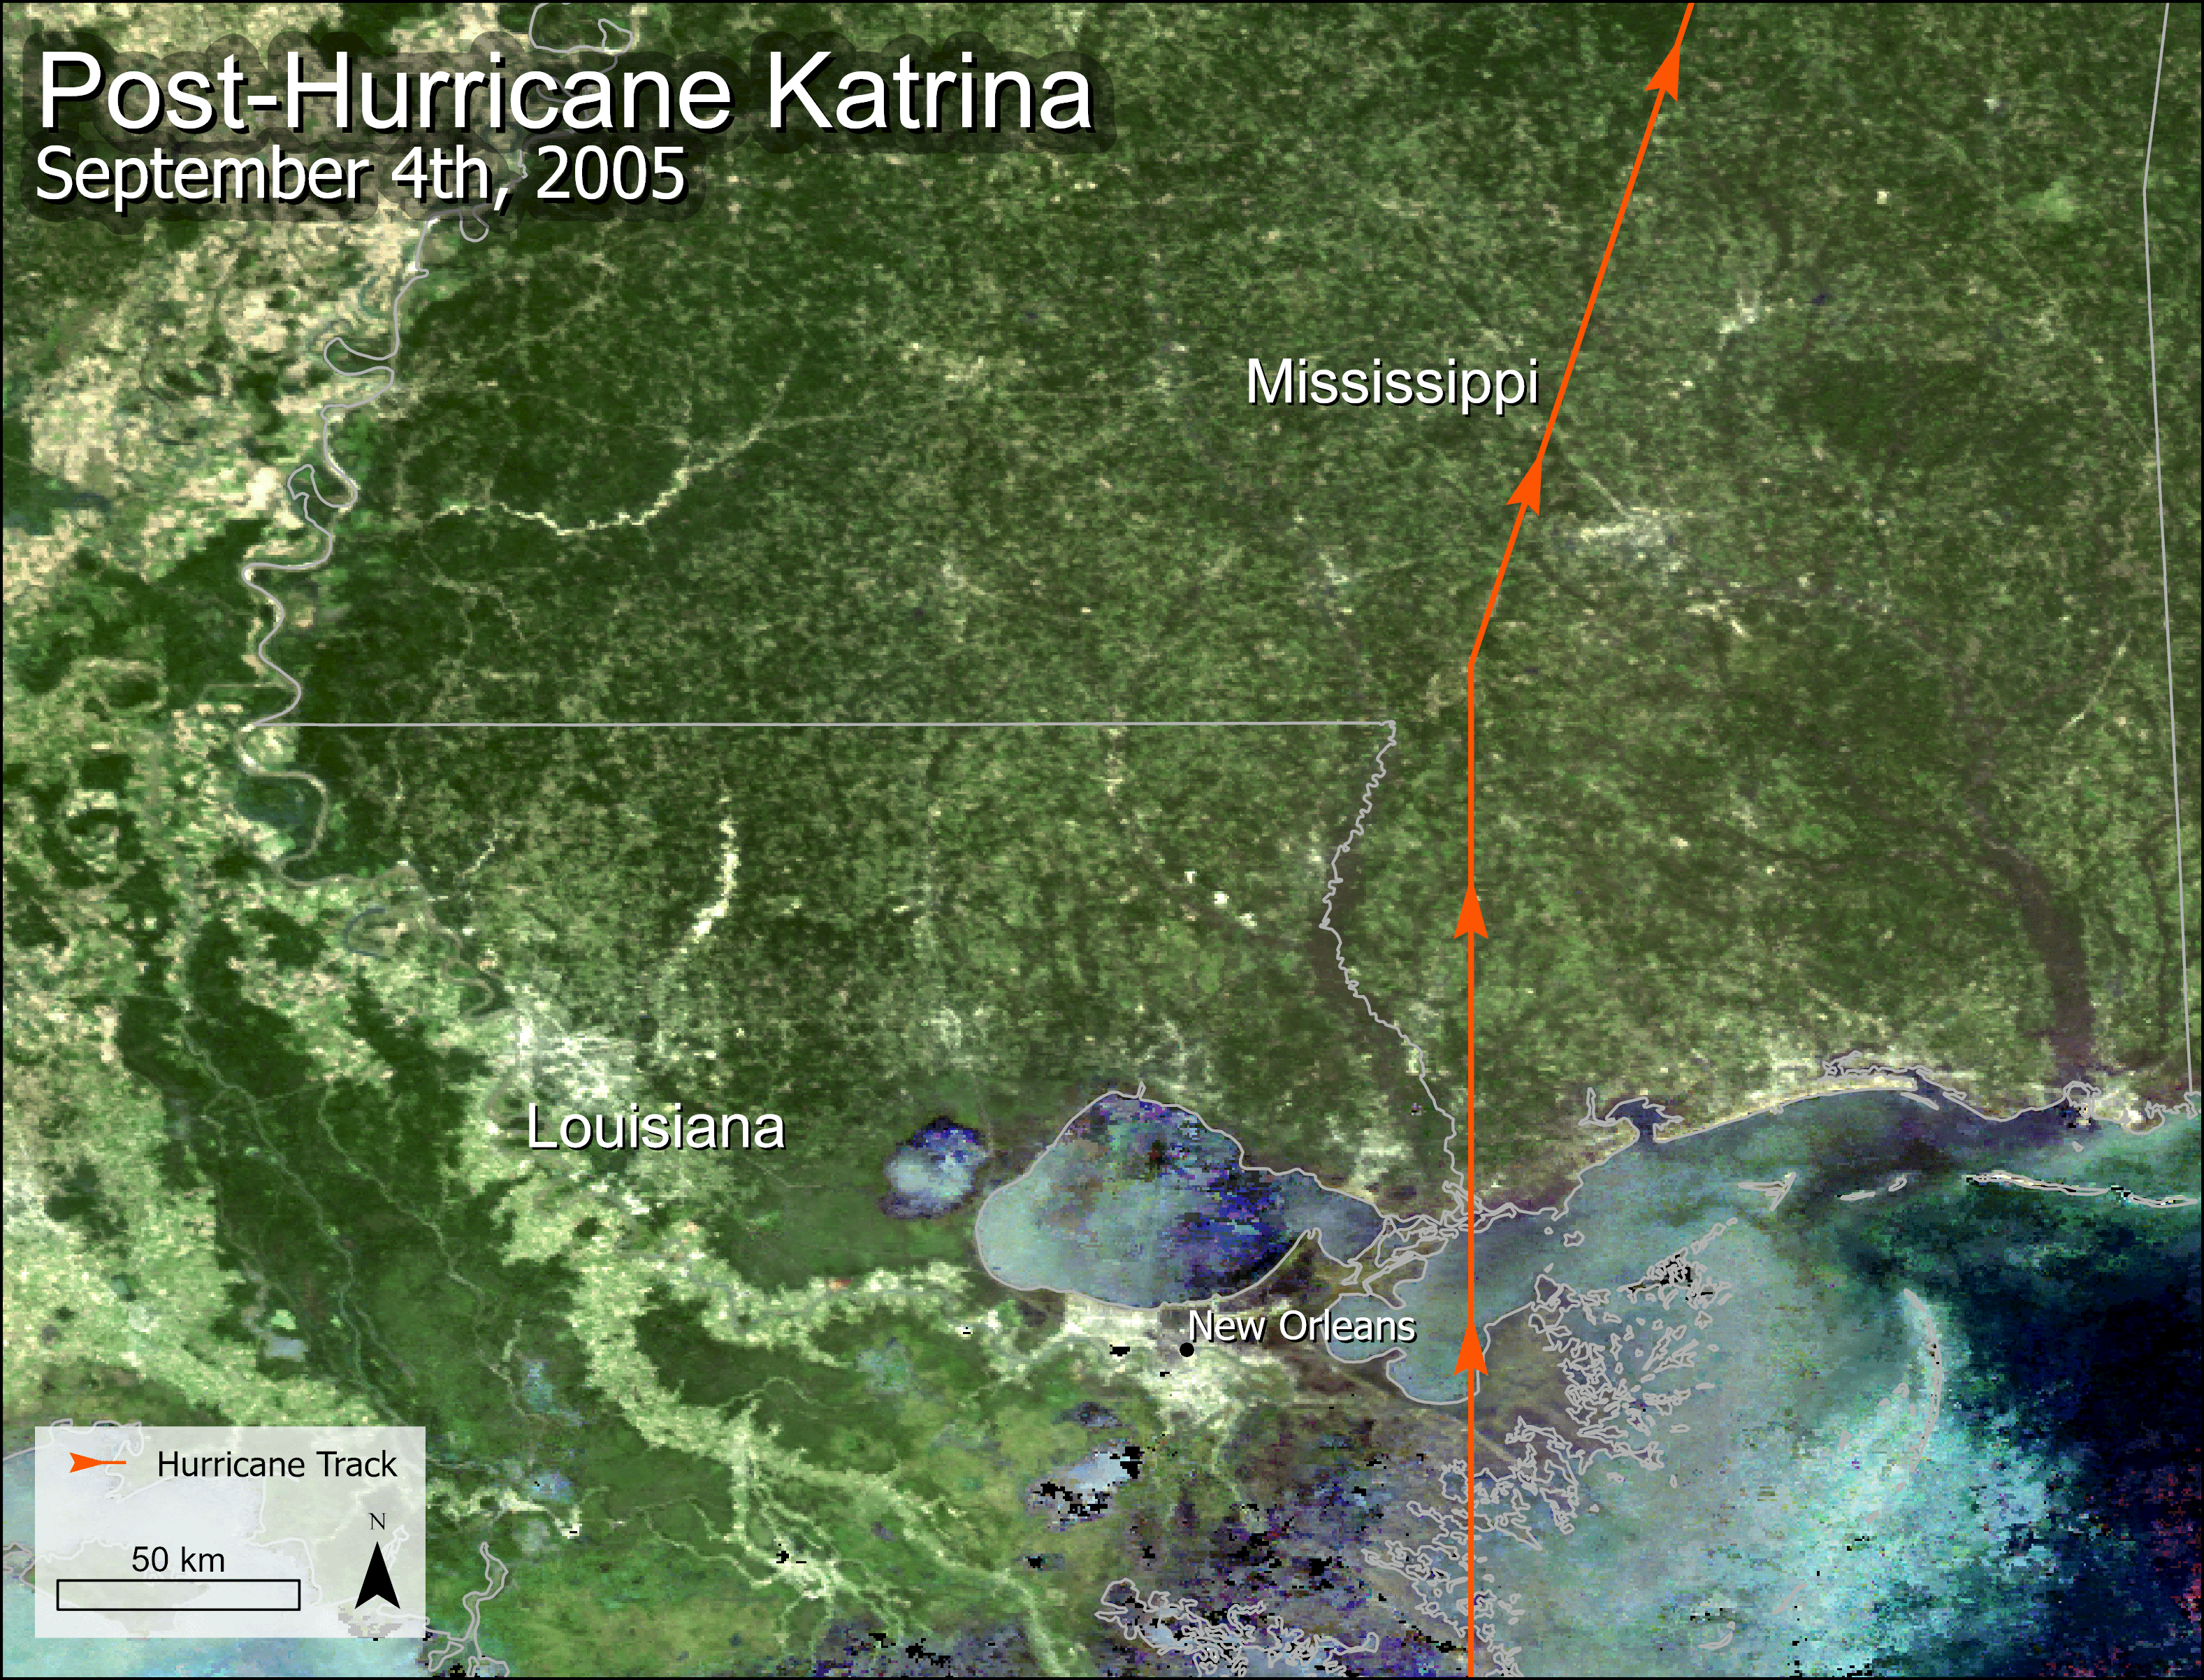 True color composite image of Louisiana and Mississippi on September 4, 2005, using the band combination 1-4-3 from the Combined Terra and Aqua MODIS BRDF-Adjusted Reflectance (NBAR) product. An orange line, signifying the track of Hurricane Katrina, stret